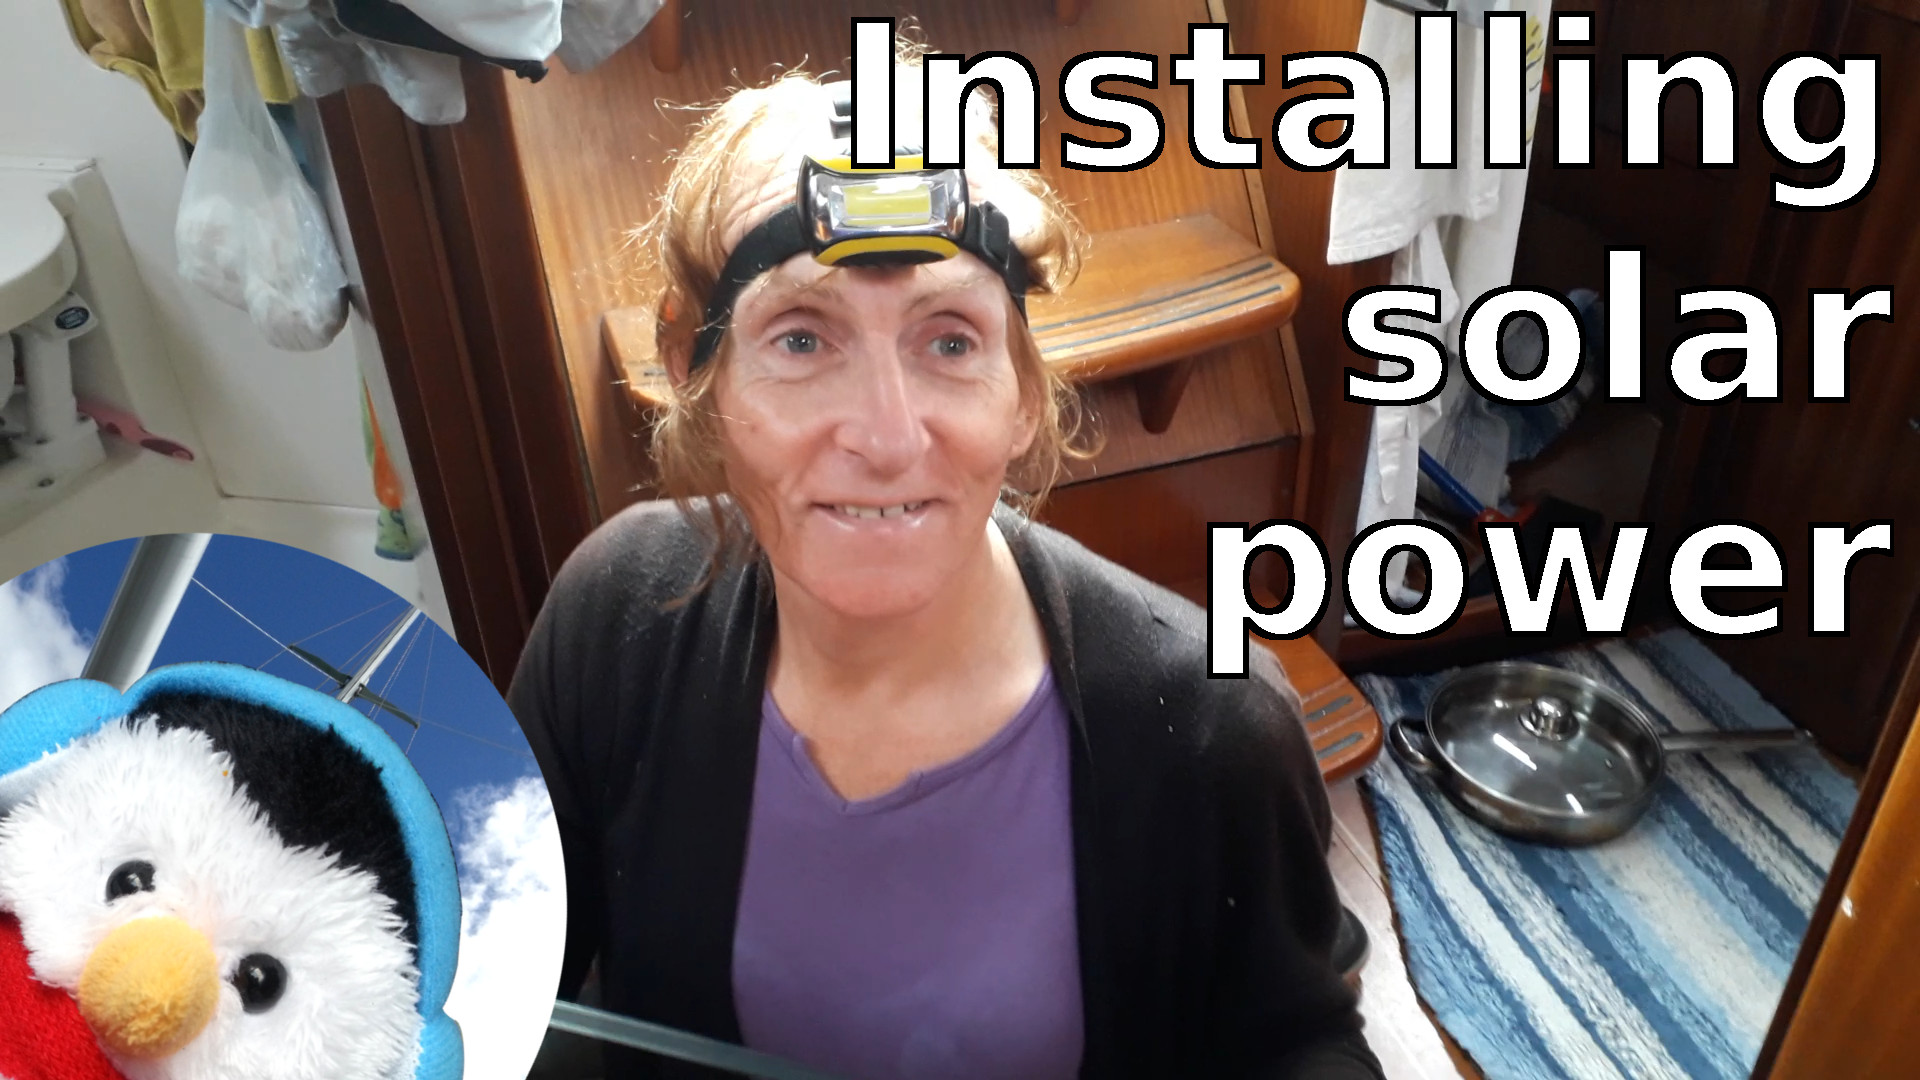 Watch our 'Installing Solar on our boat' video and add comments etc.